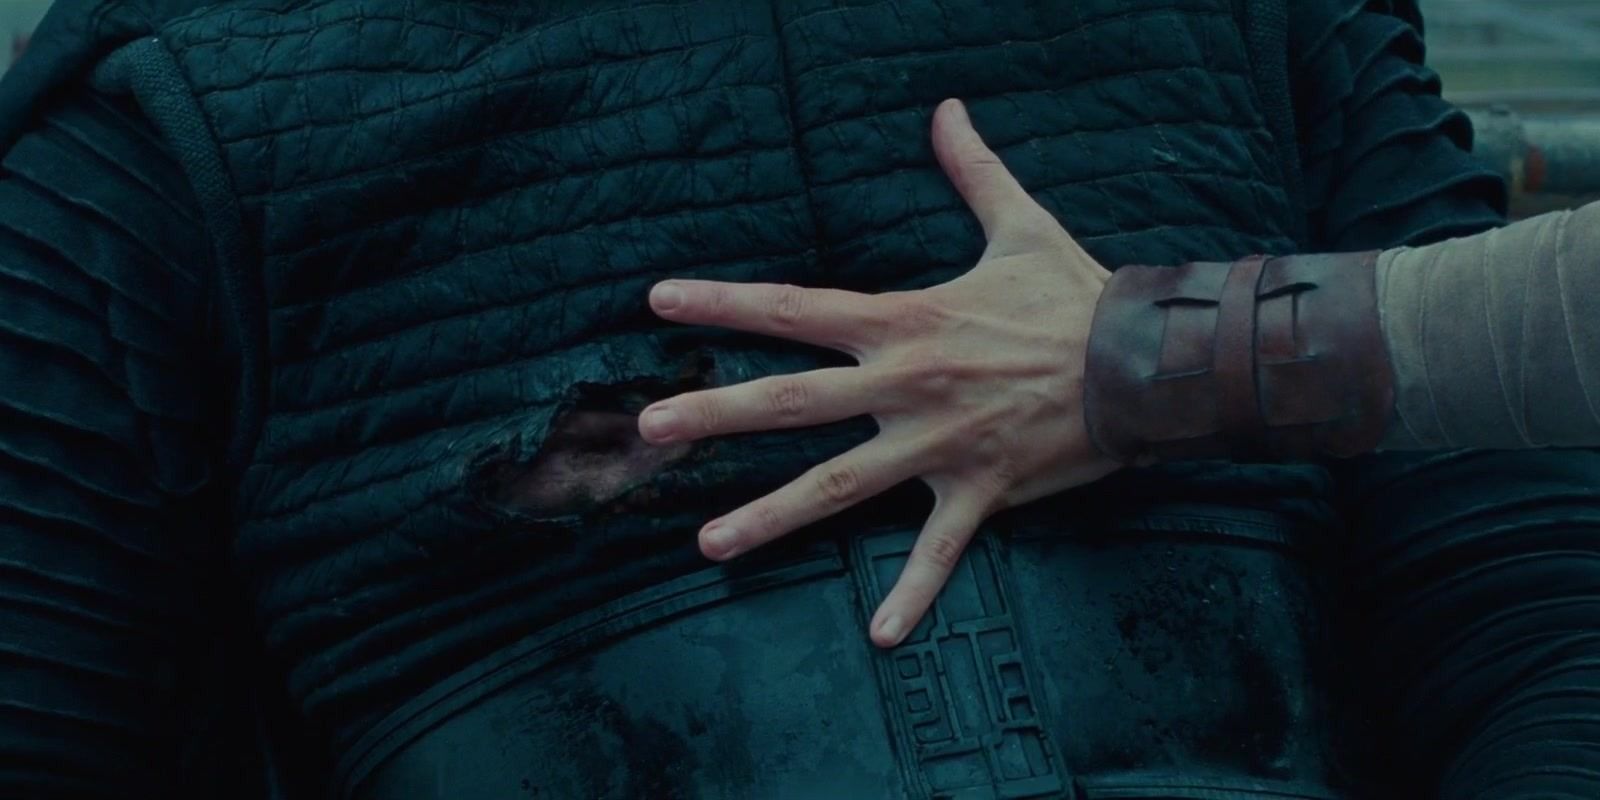 Rey holding her hand over Kylo Ren's wound to heal it